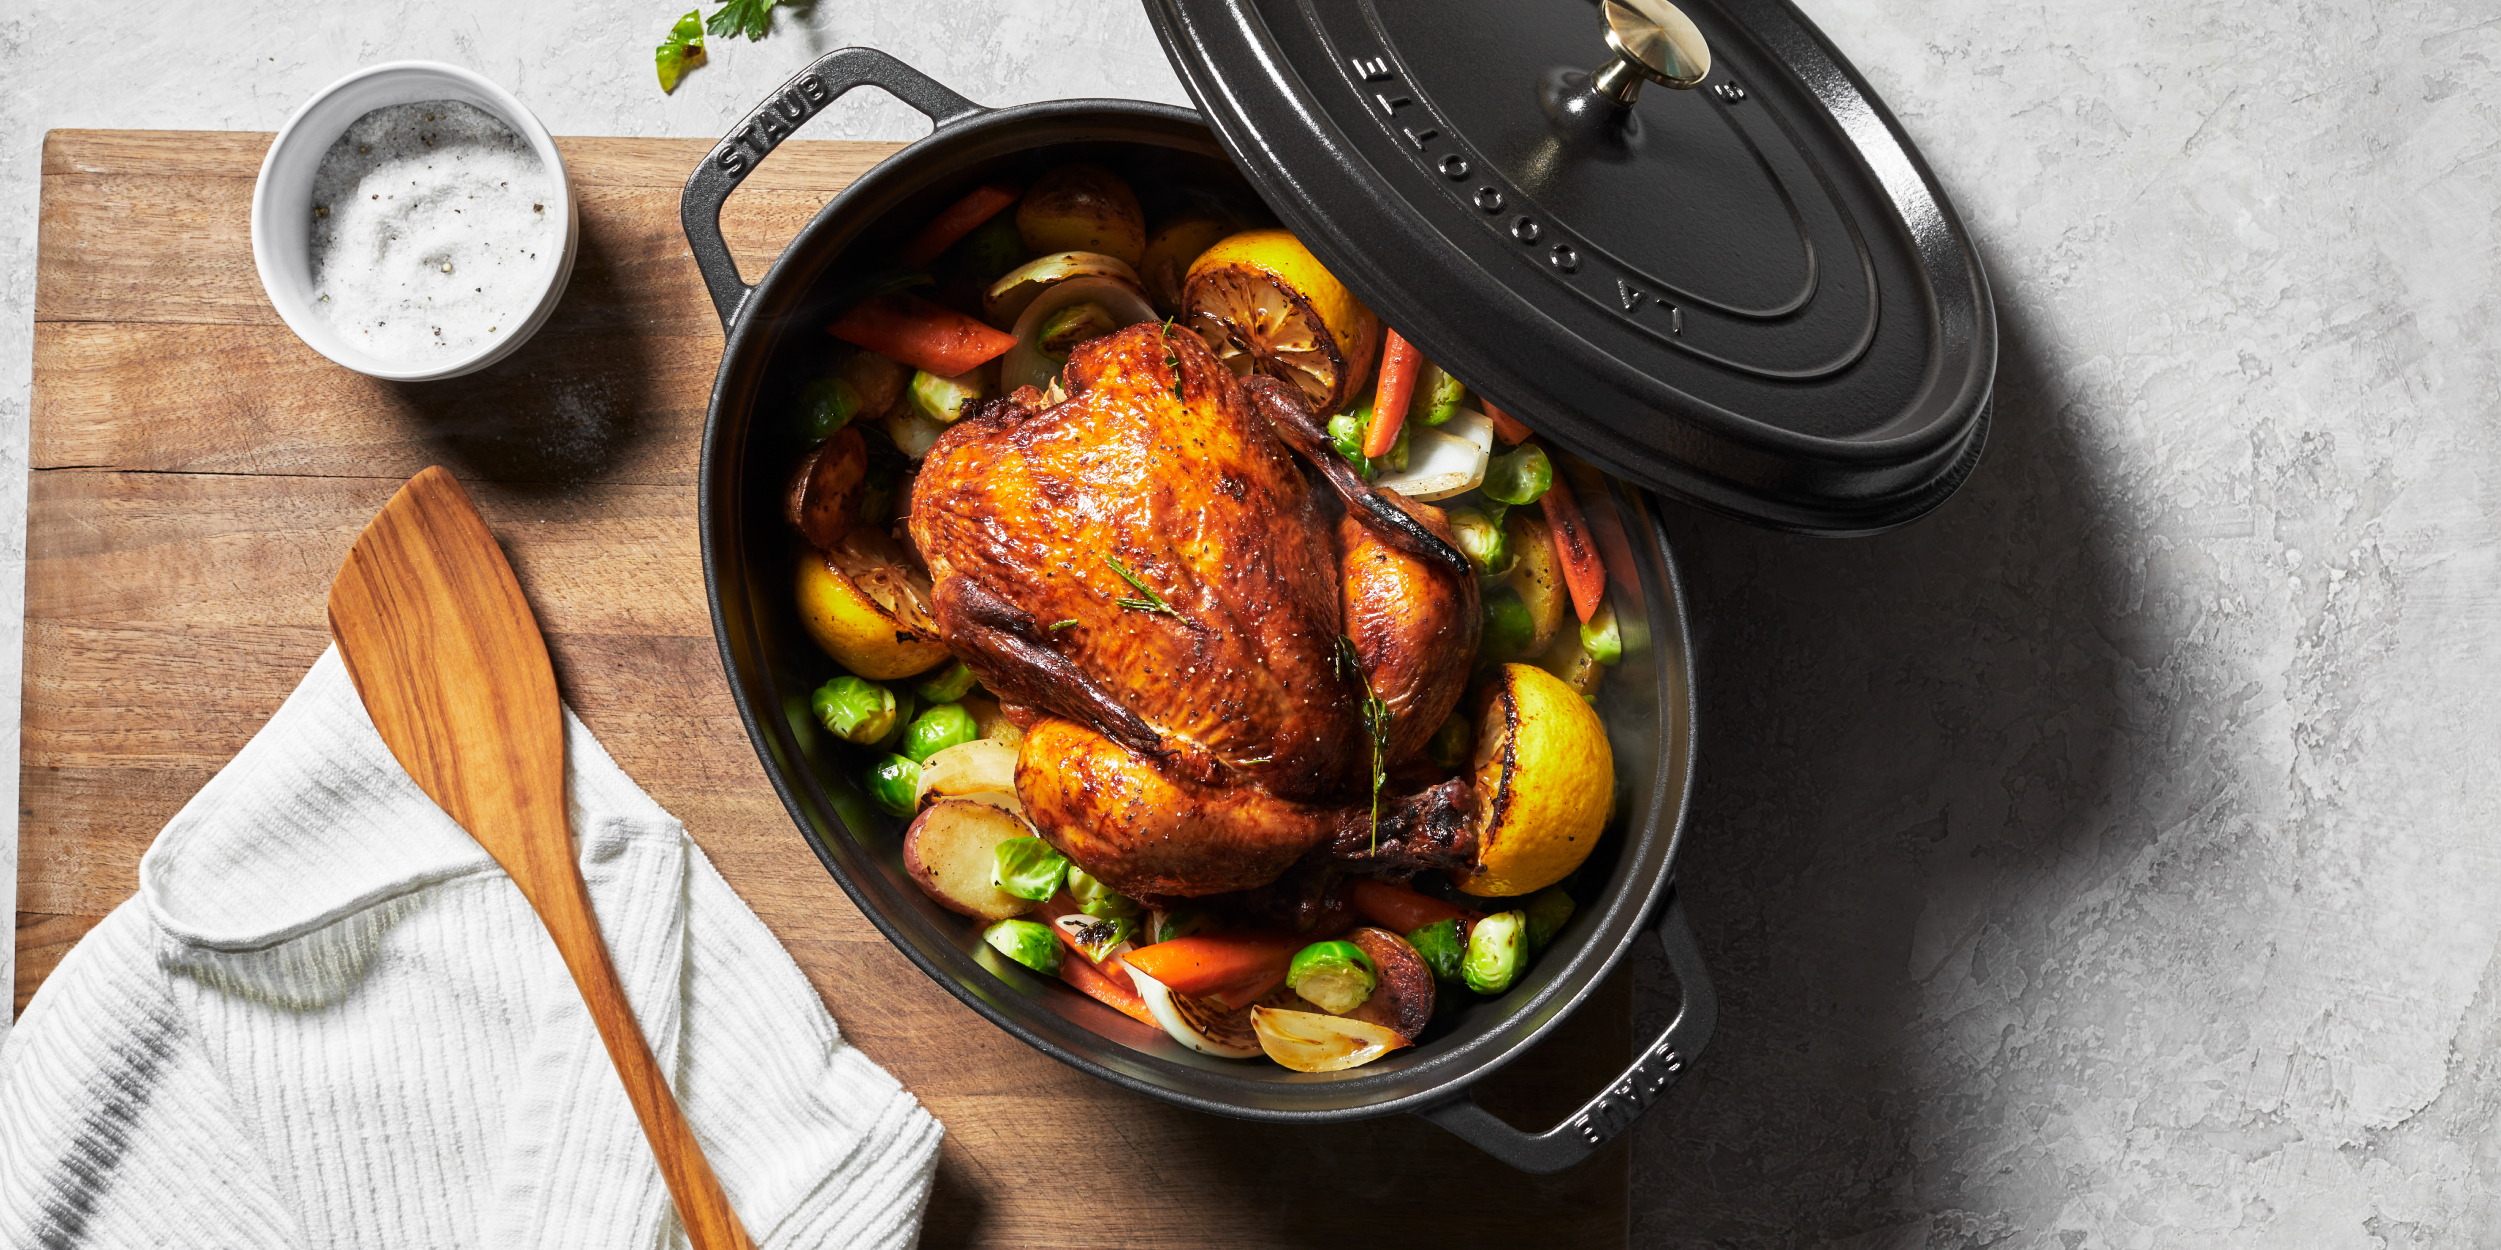 Staub Cast Iron Oval Cocotte, Dutch Oven, 7-quart, serves 7-8, Made in  France, Matte Black, 7-qt - Fry's Food Stores